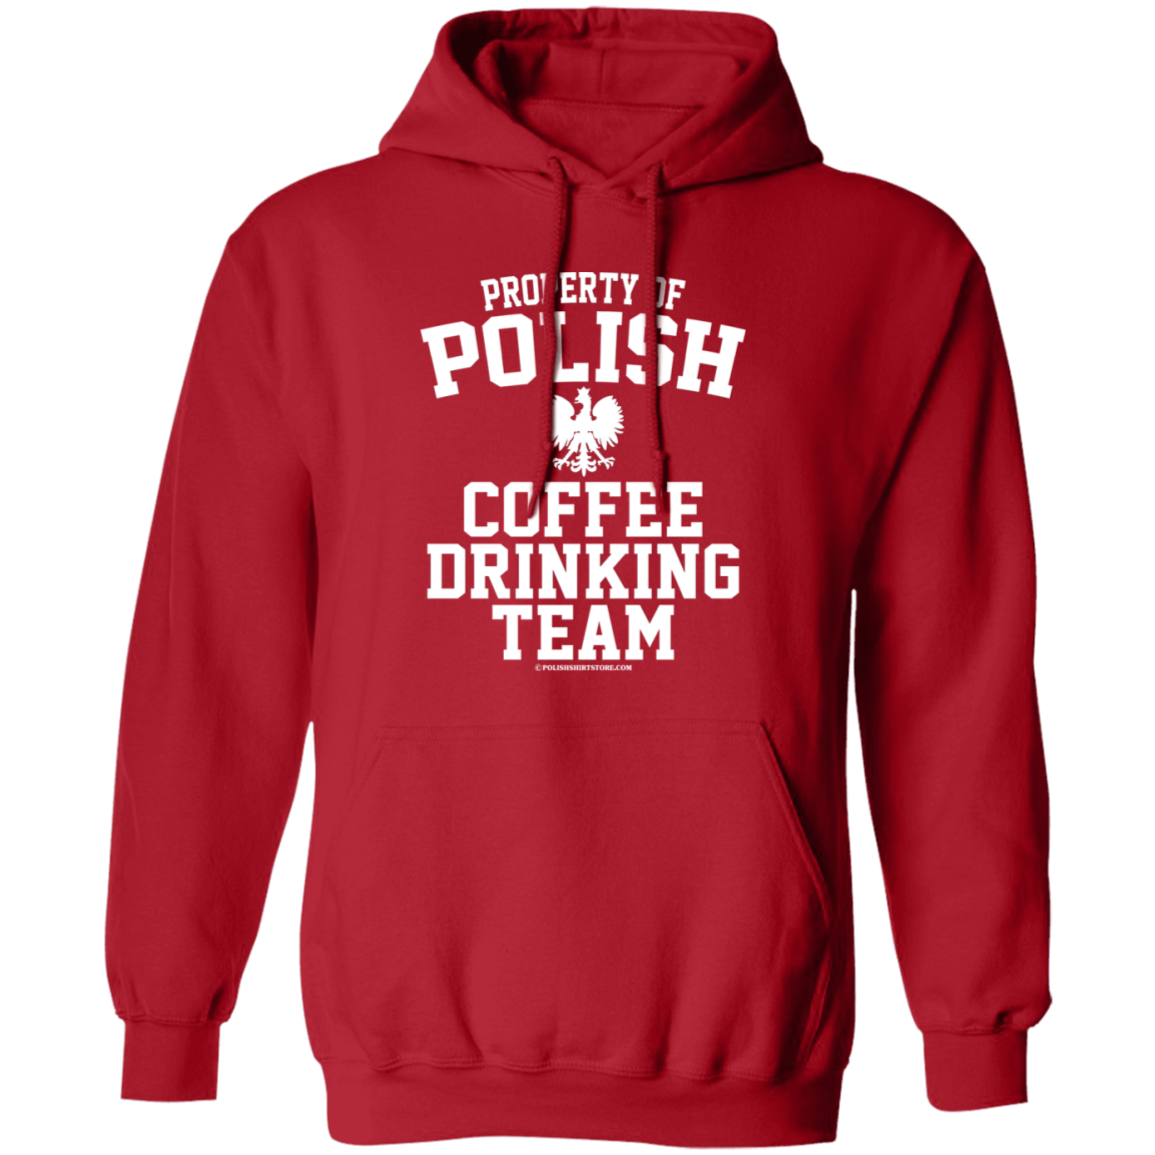 Property of Polish Coffee Drinking Team Apparel CustomCat G185 Pullover Hoodie Red S